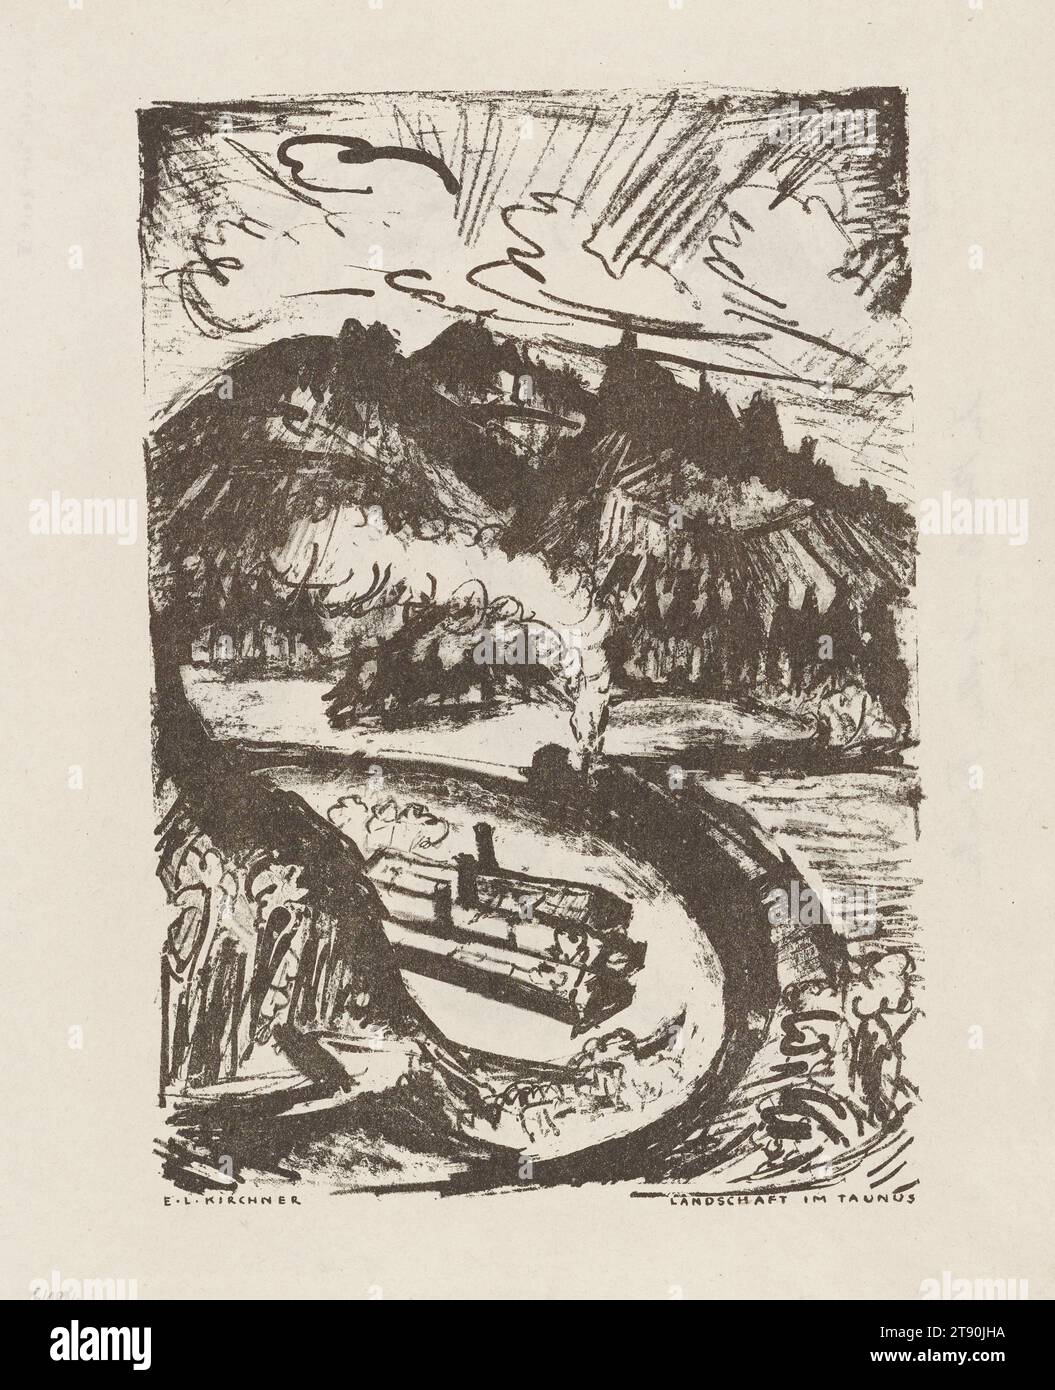 Landscape in the Taunus (Landschaft im Taunus) (recto) and Signs of the Times V: Into Dust with All Enemies (Symbole der Zeit V: In Staub mit allen Feinden) (verso), page from 'Der Bildermann', folio 13, vol. 1, no. 6, June 1916, Ernst Ludwig Kirchner (recto); Artist: Max Slevogt (verso); Publisher: Galerie Paul Cassirer; Printer: M.W. Lassaly, German, 1880–1938, 13 1/2 × 11 in. (34.29 × 27.94 cm) (sheet), Lithographs, Germany, 20th century, In 1916, publisher Paul Cassirer started a new periodical, 'Der Bildermann' The Picture Man, 'to bring a broad public directly in touch with art.' Stock Photo